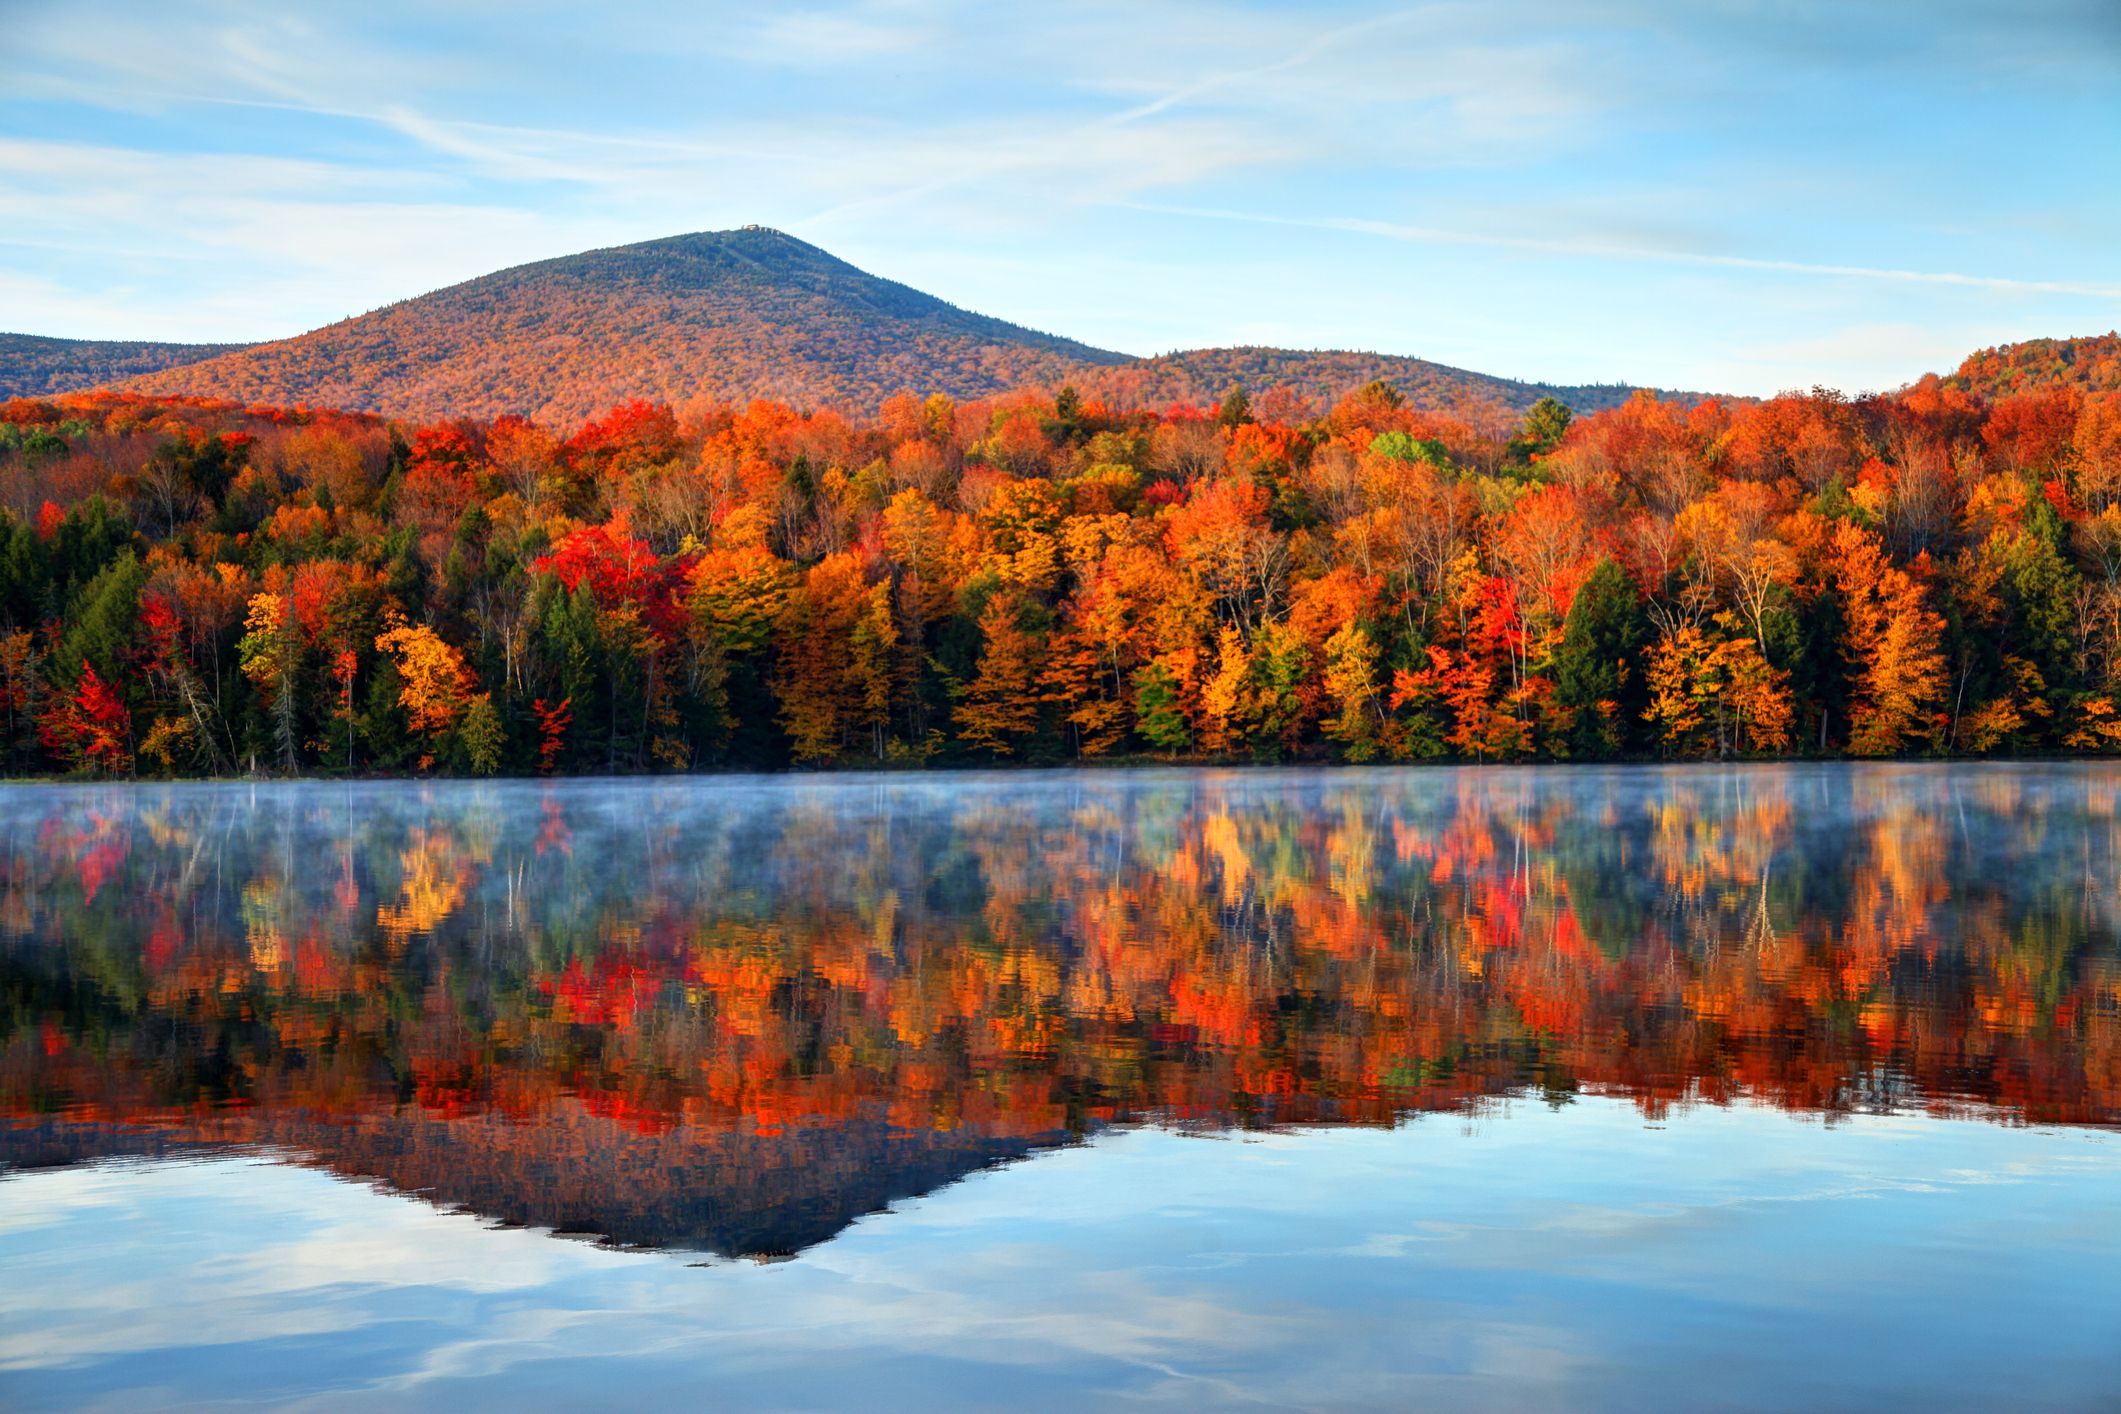 Photos Show What Top Fall Foliage Destinations Look Like in Winter